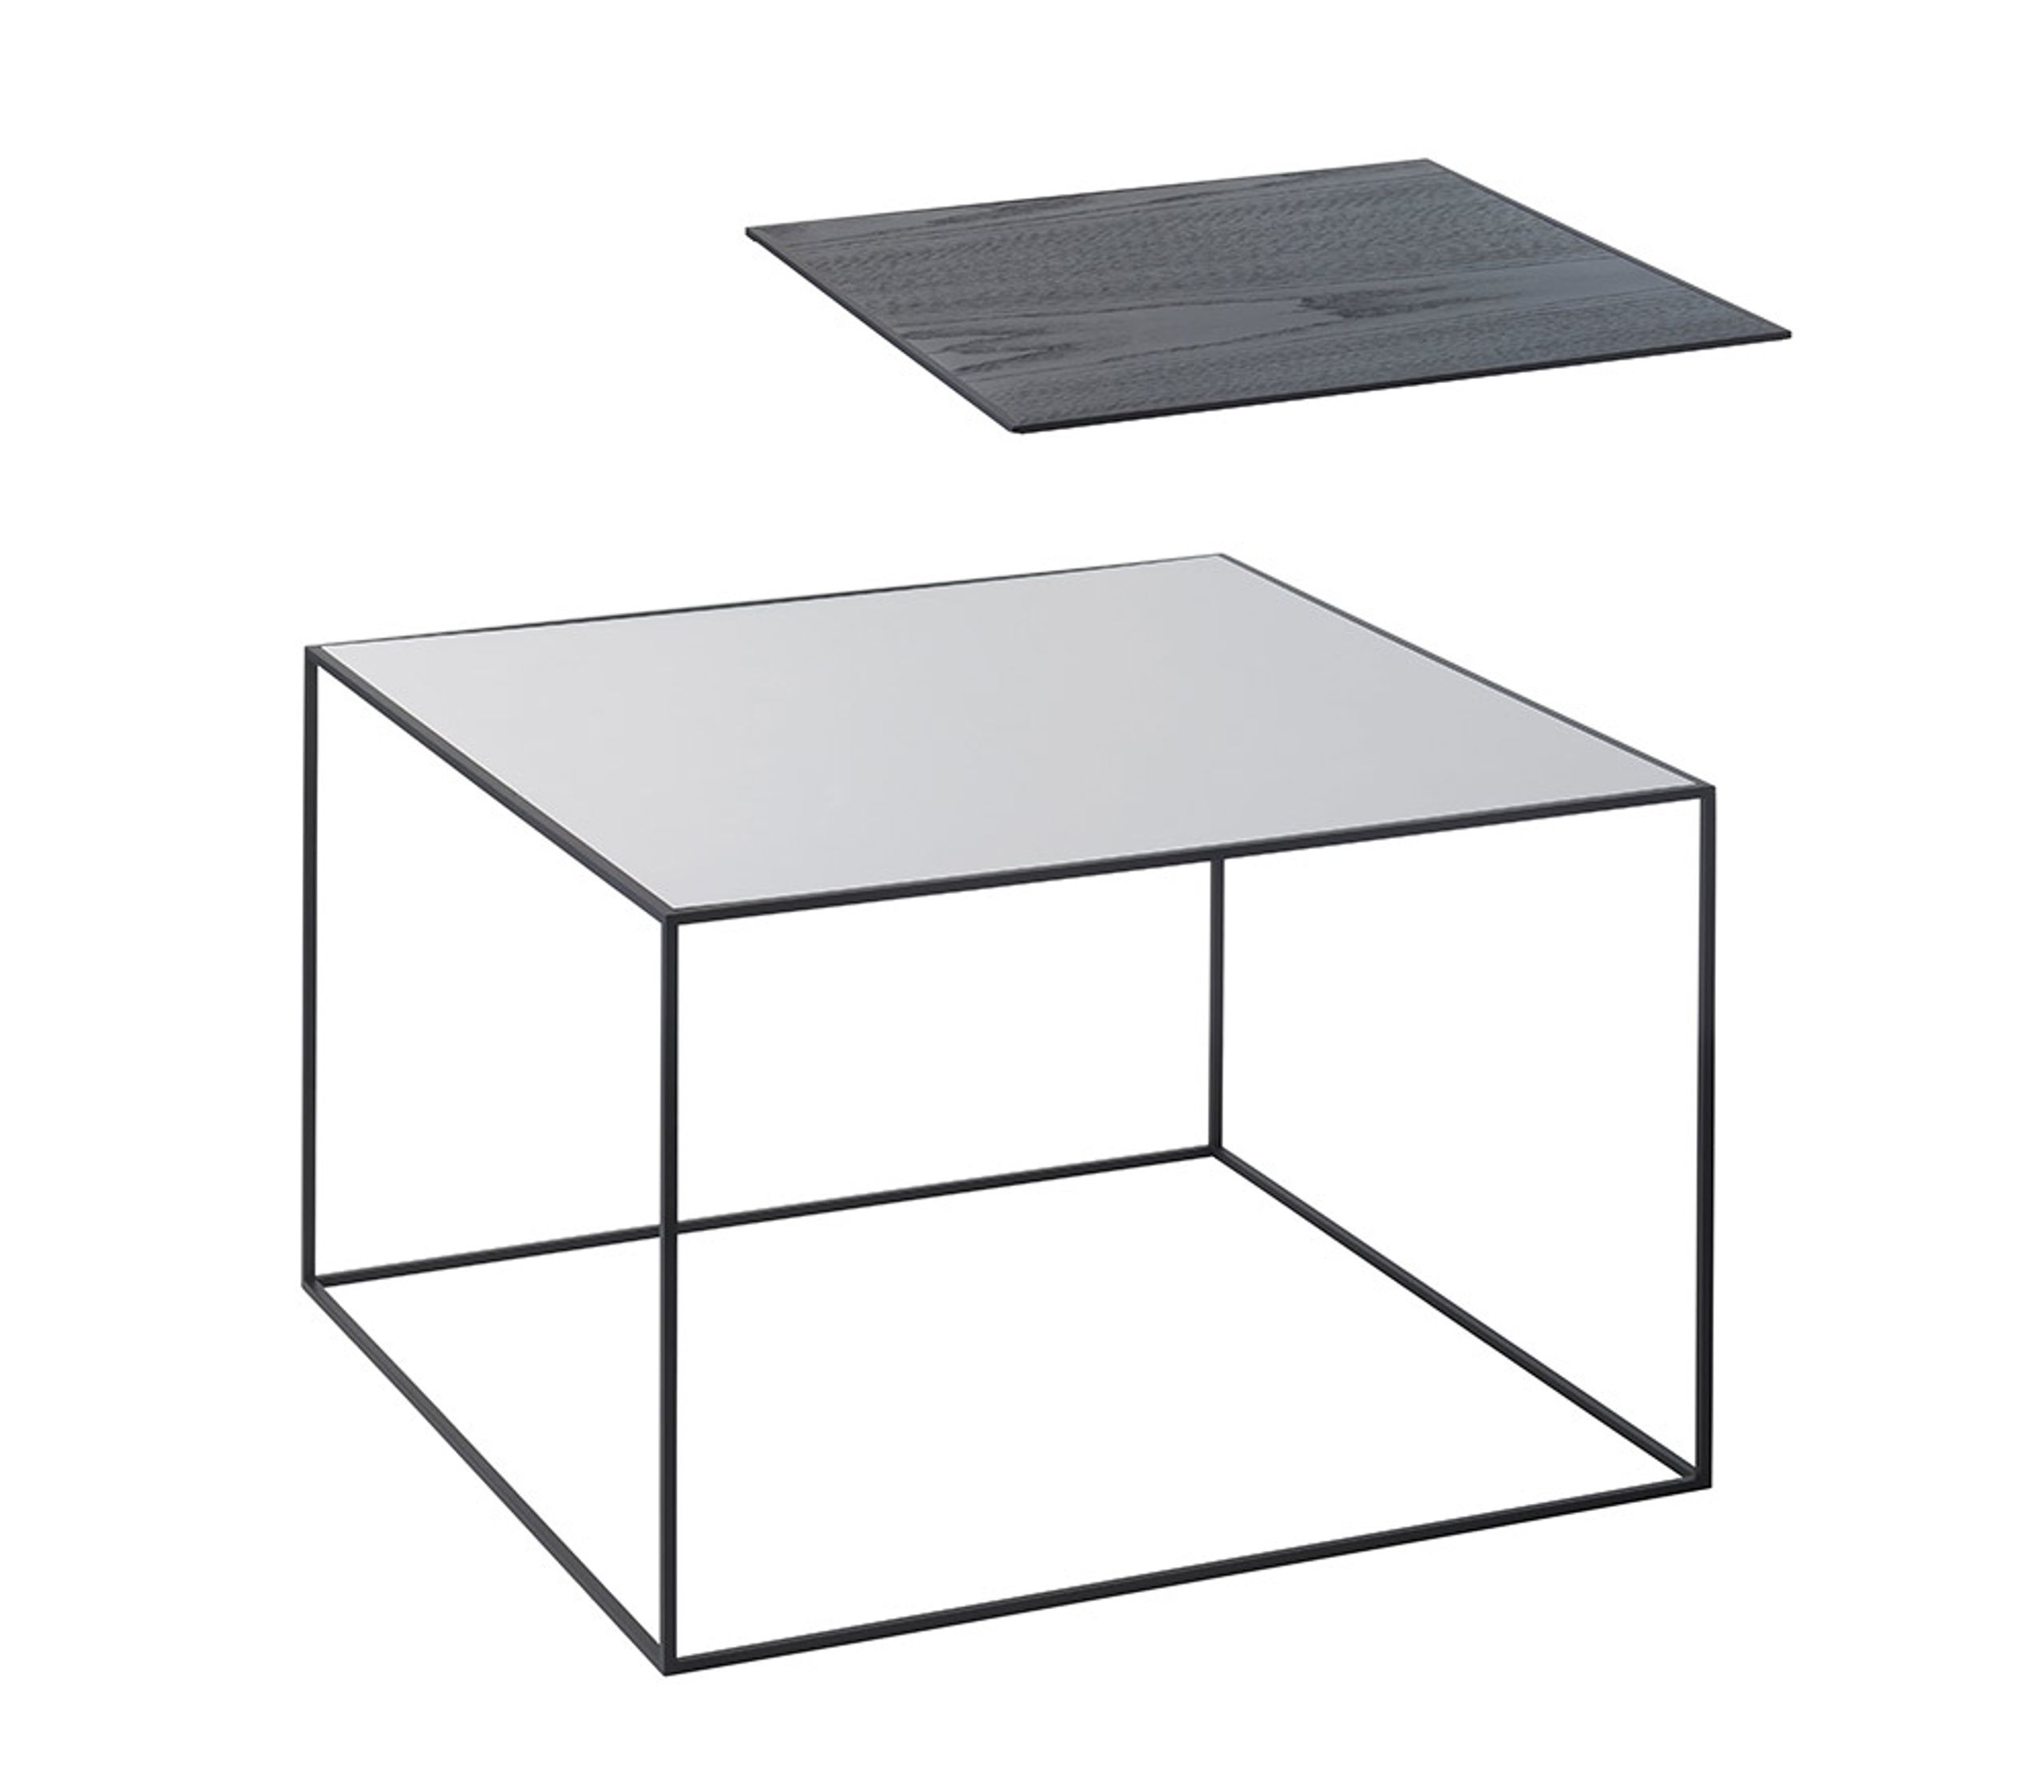 By Lassen - Conseil d'administration - Twin Tabletops - Black Stained Ash / Cool Grey - Twin 49